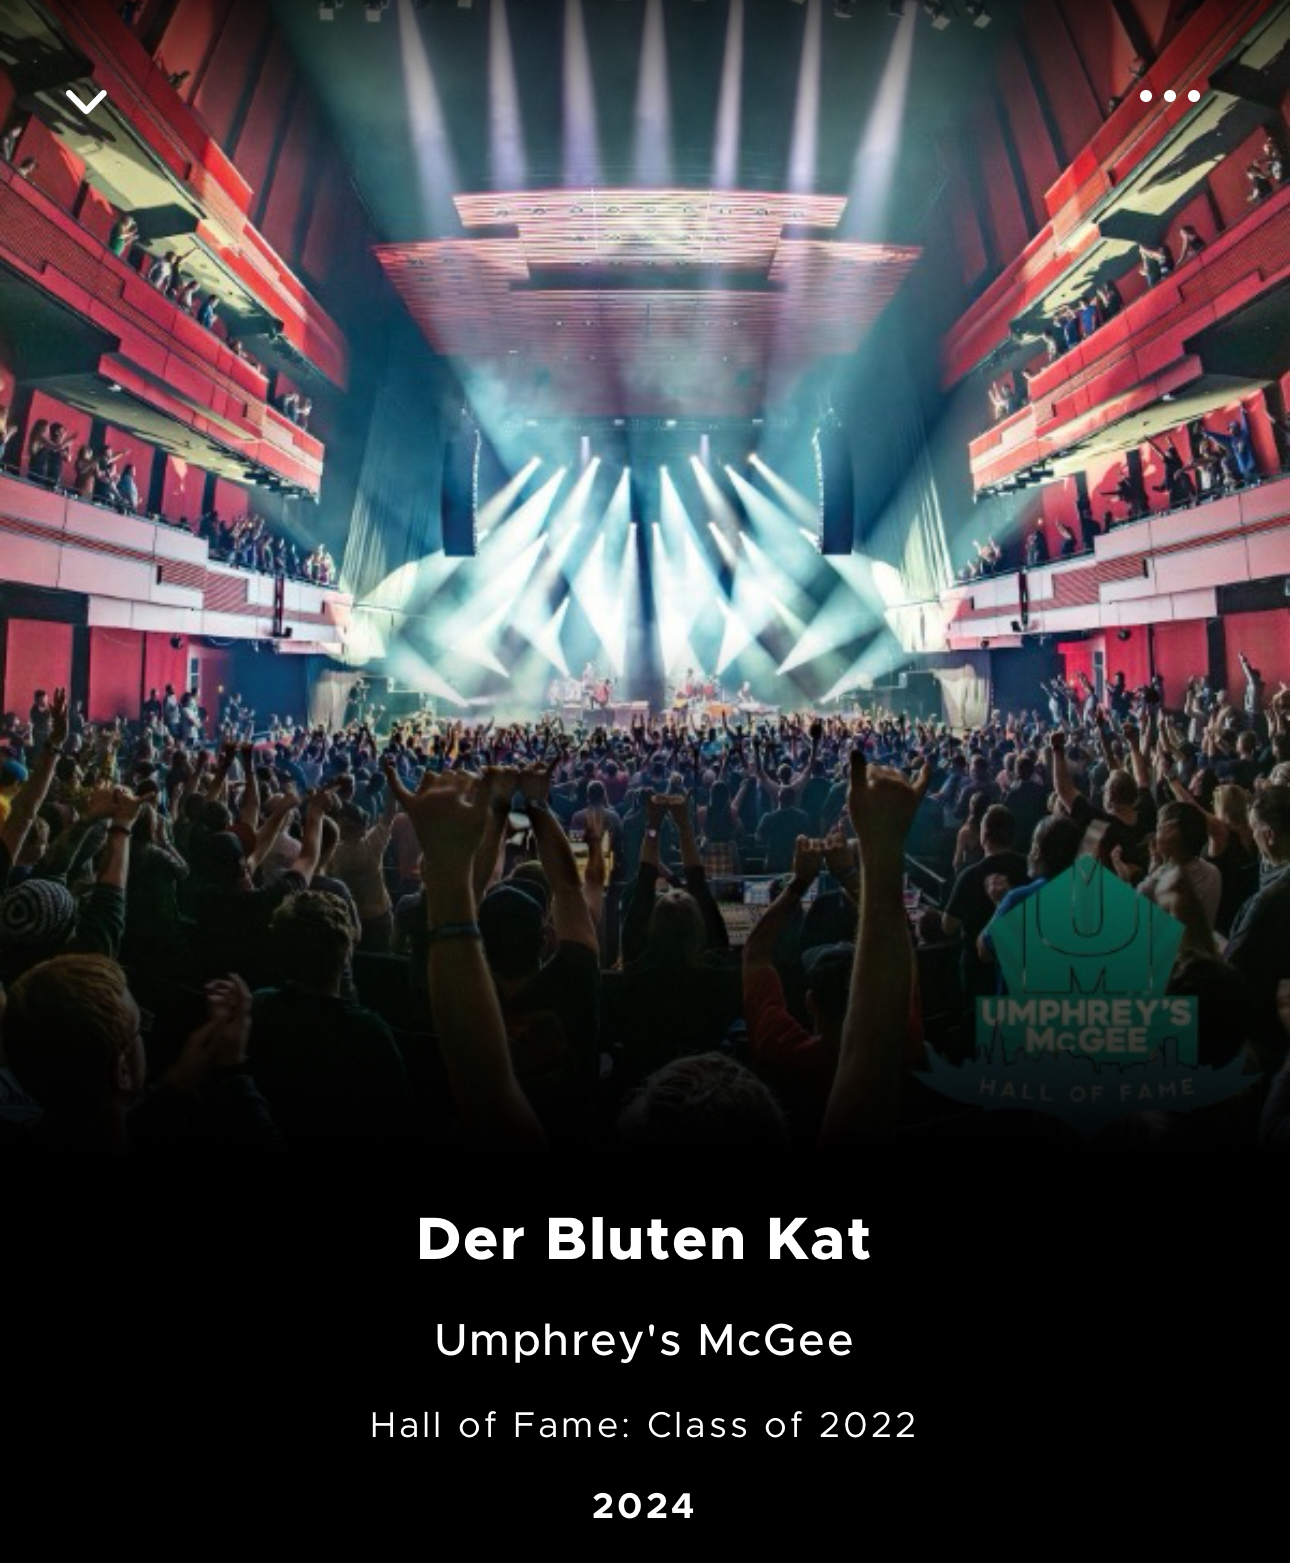 Concert scene with audience raising hands towards a brightly lit stage, with the text “Der Bluten Kat, Umphrey’s McGee, Hall of Fame: Class of 2022, 2024” indicating the band and album details.